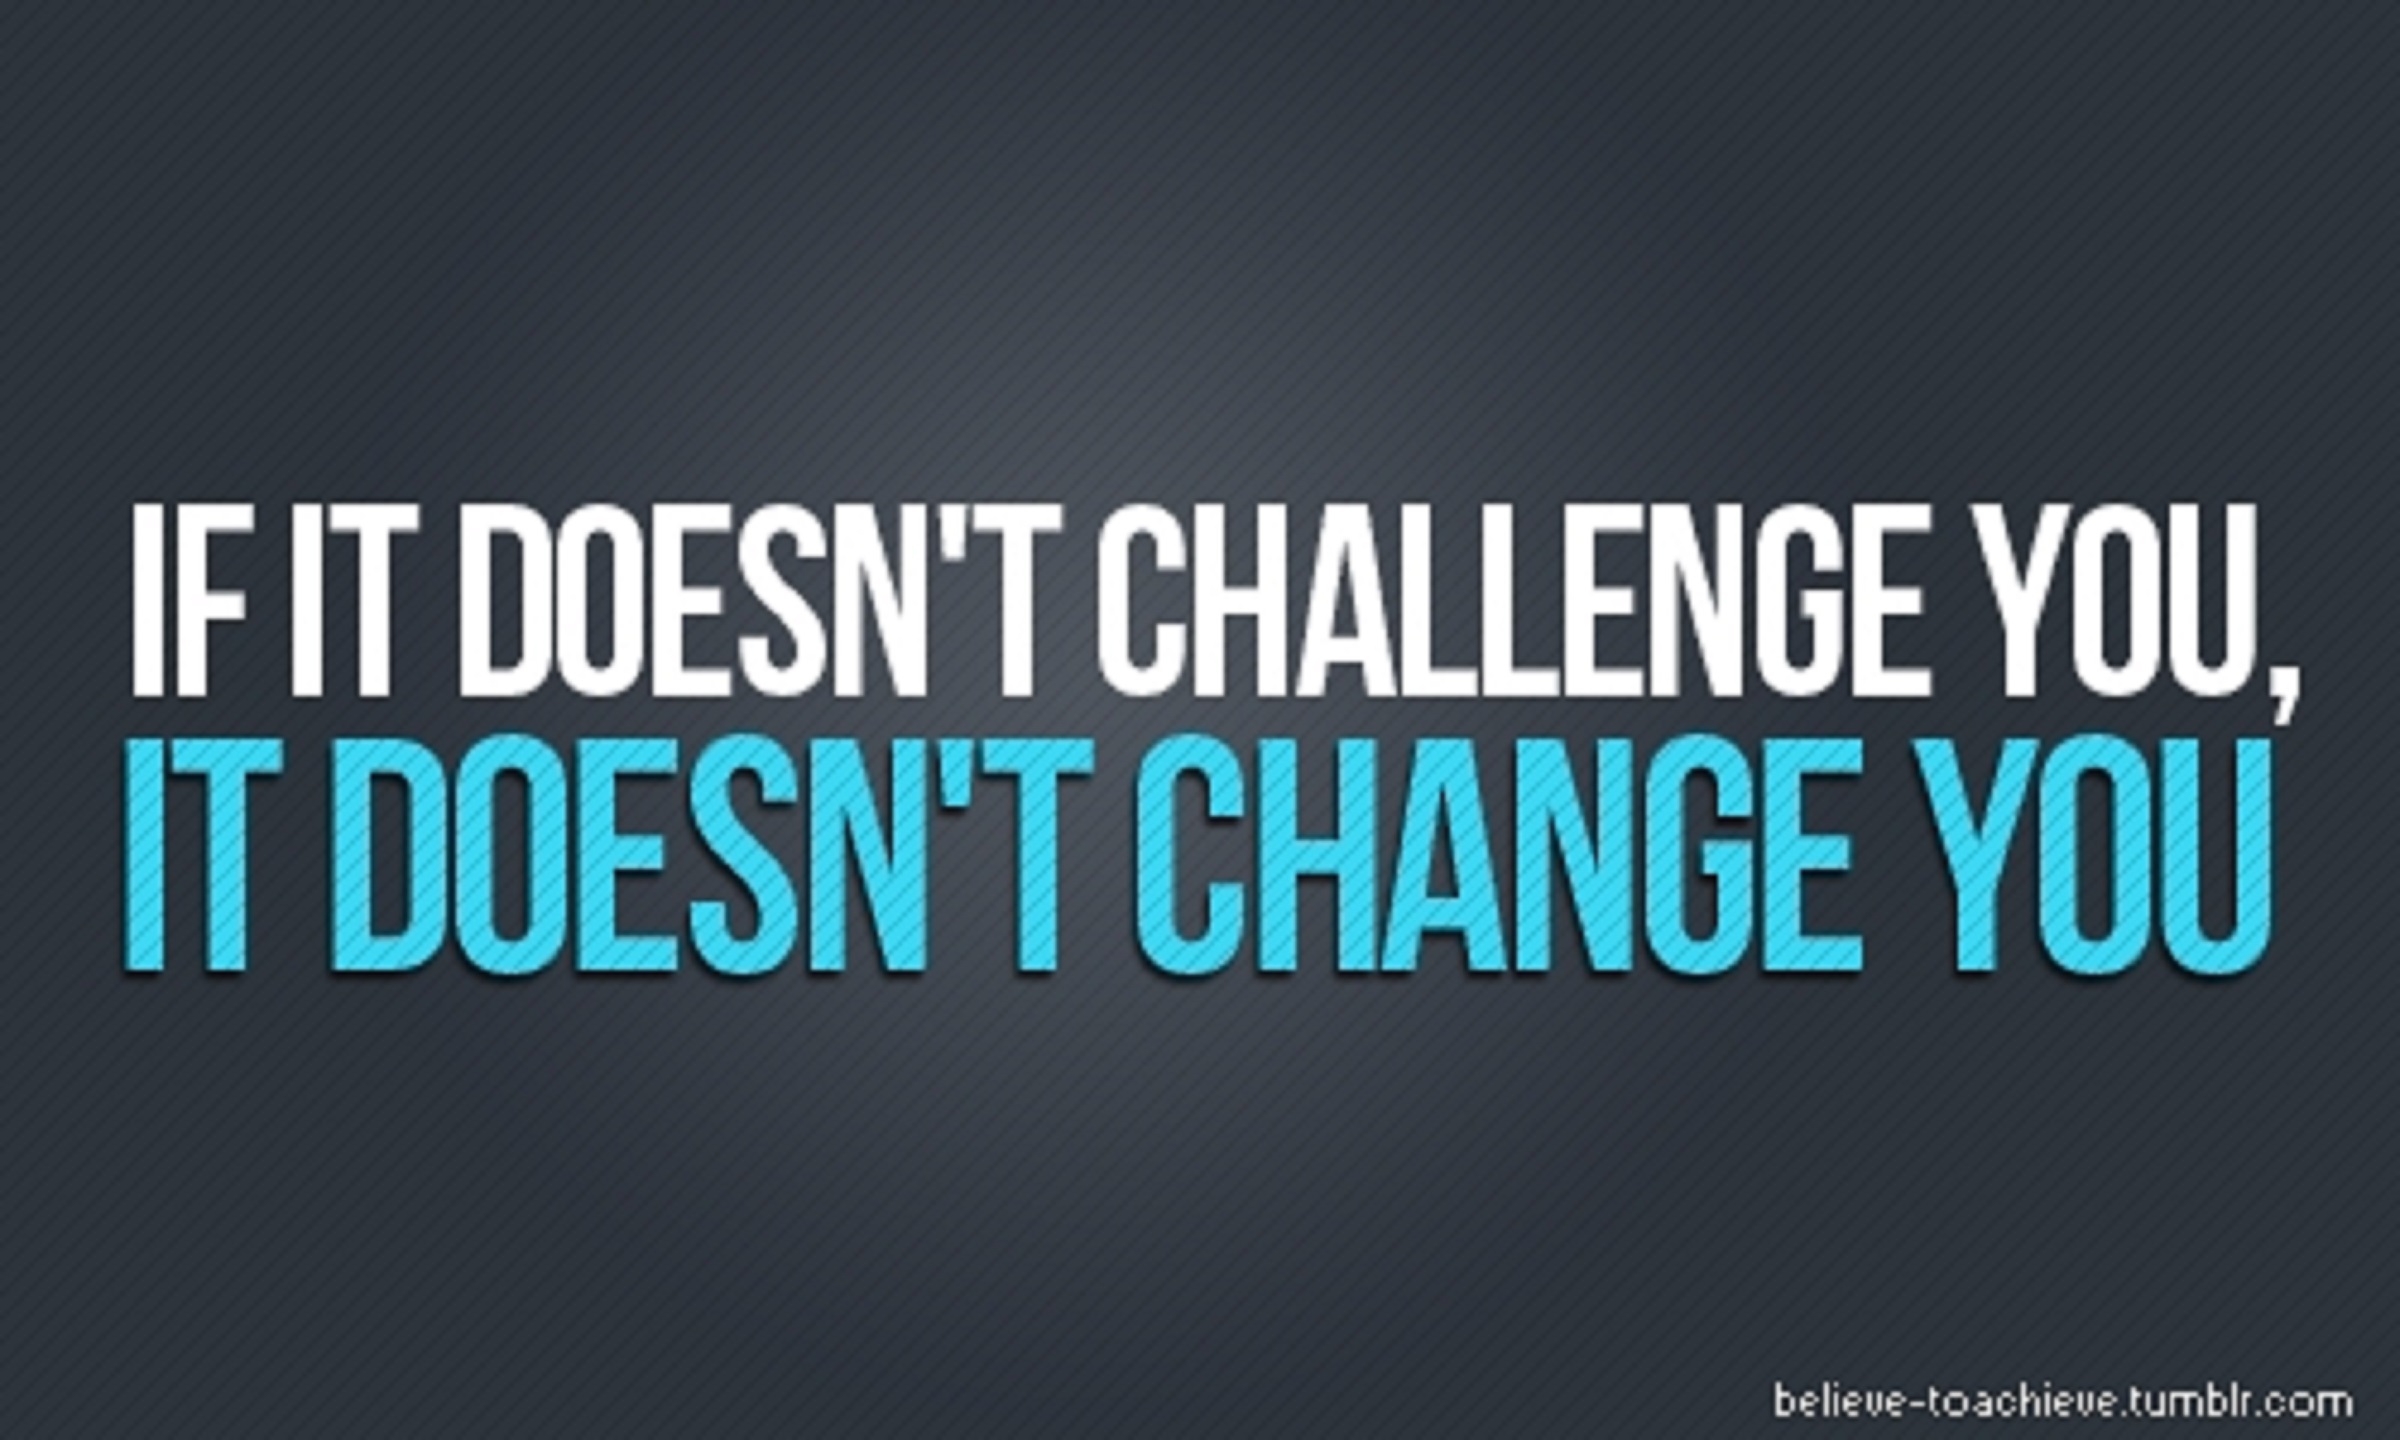 Weight Loss Challenge Quotes. QuotesGram